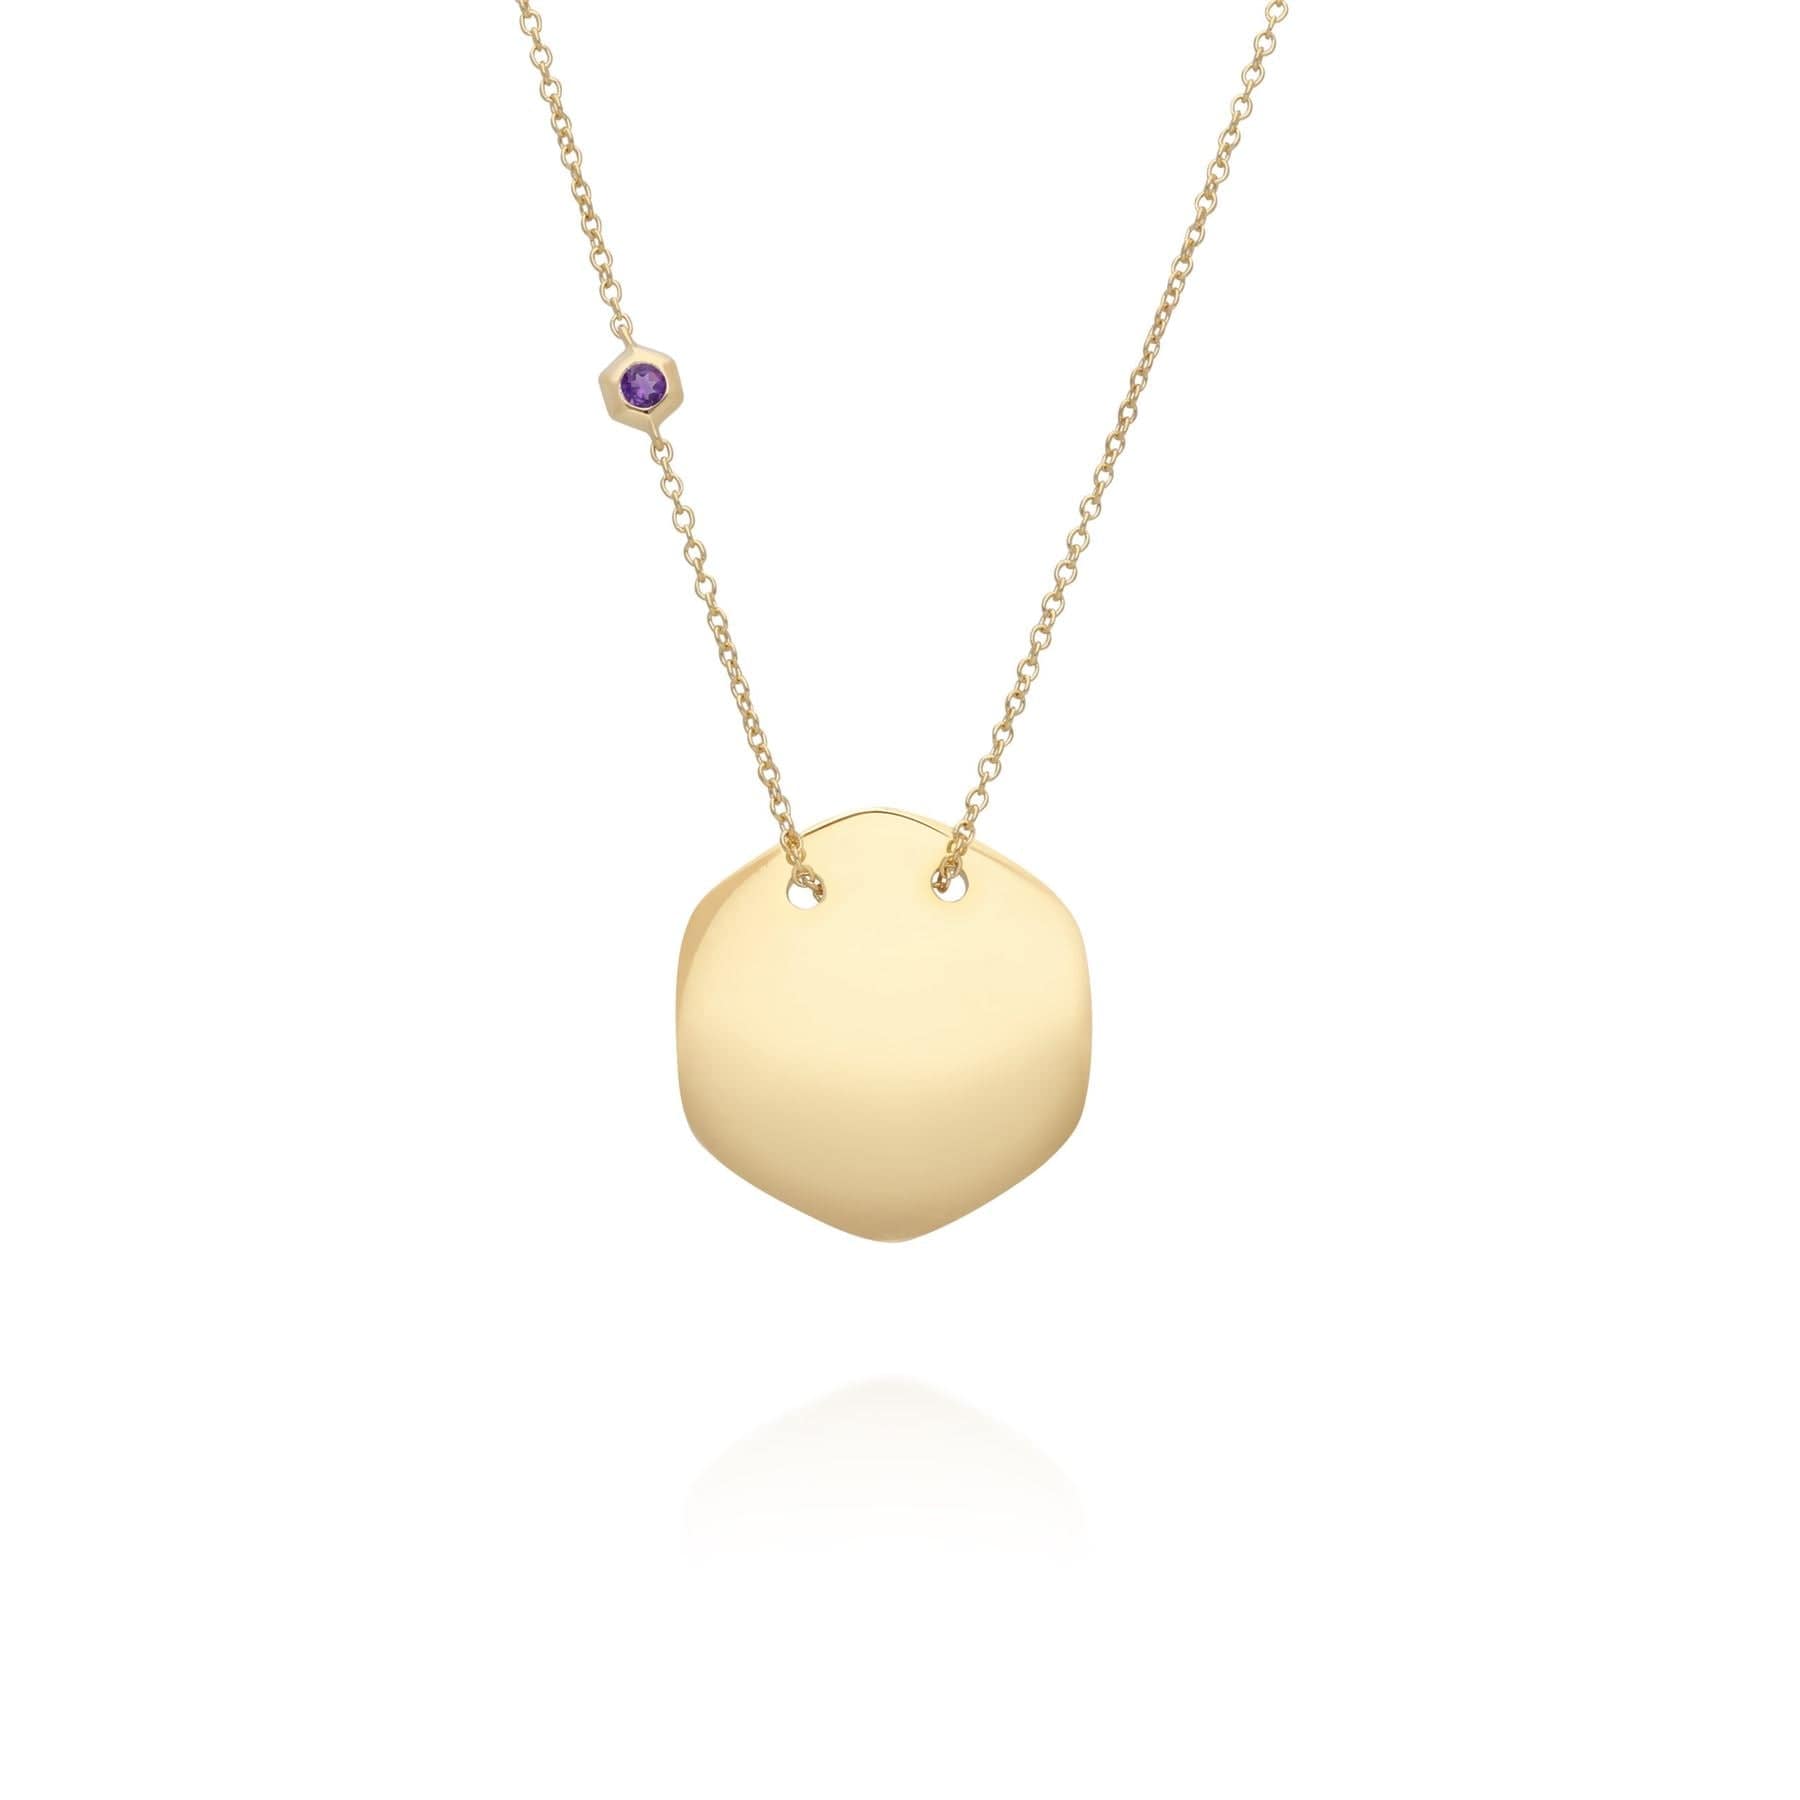 Amethyst Engravable Necklace in Yellow Gold Plated Sterling Silver - Gemondo